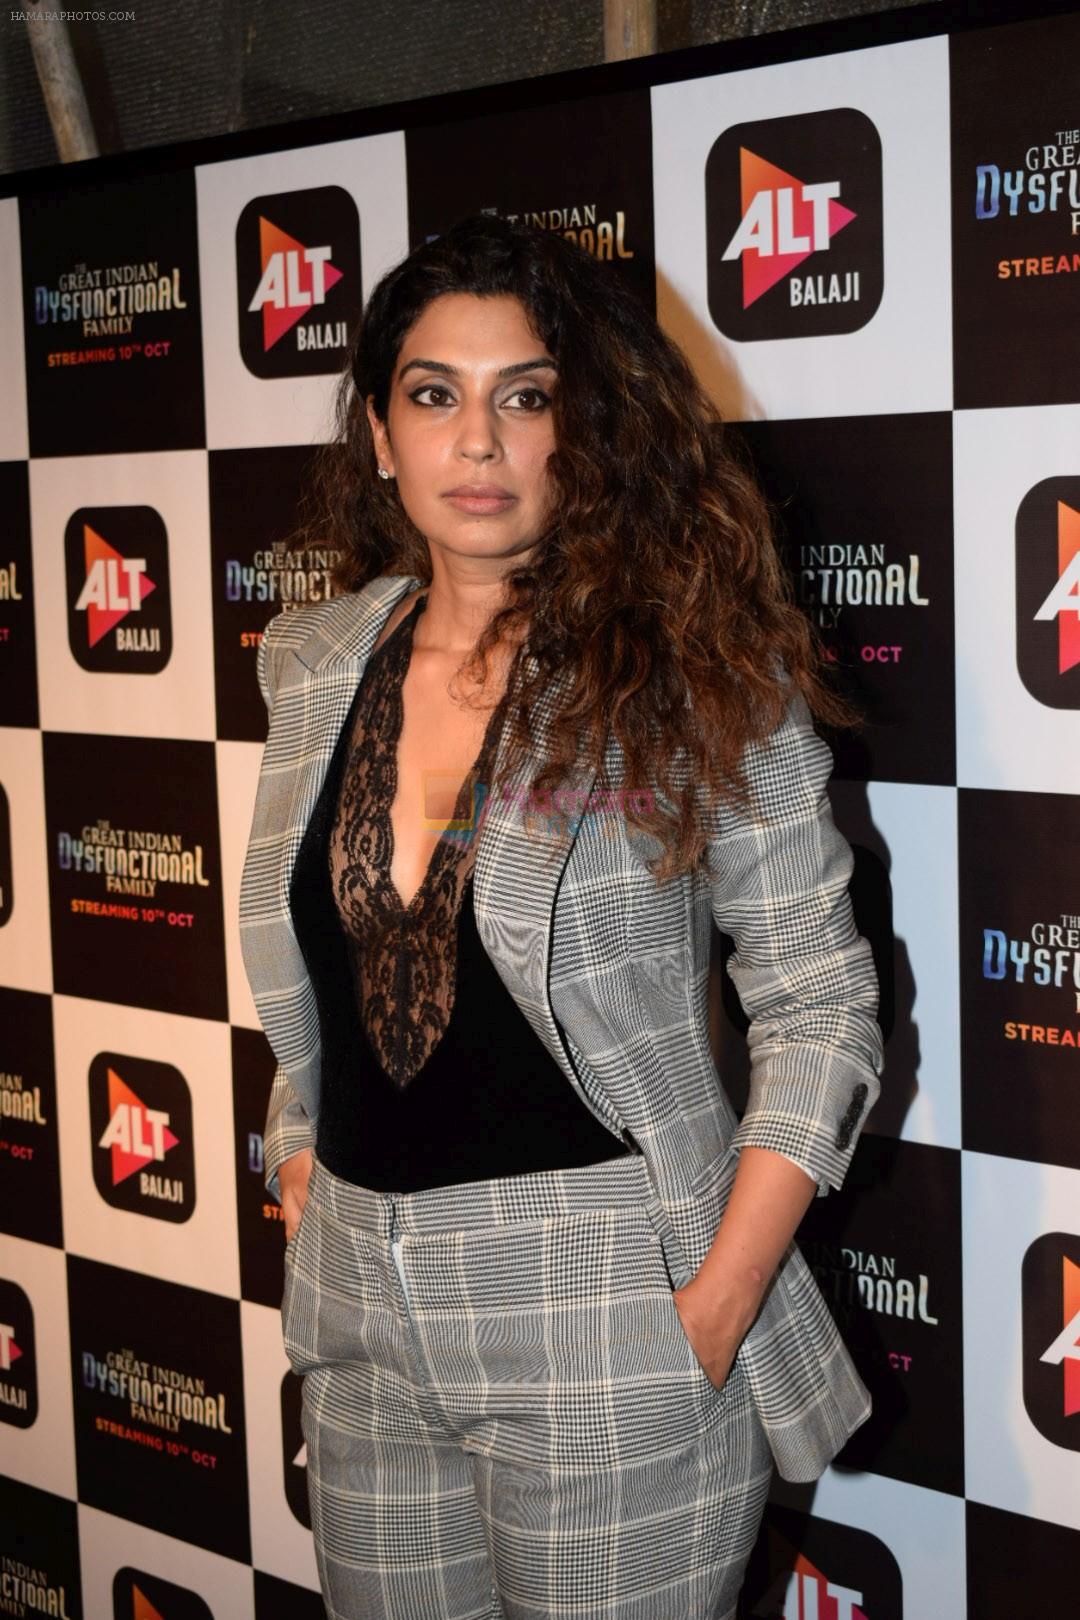 Masumeh Makhija at the Screening of Alt Balaji's new web series The Dysfunctional Family in Sunny Super Sound juhu on 10th Oct 2018